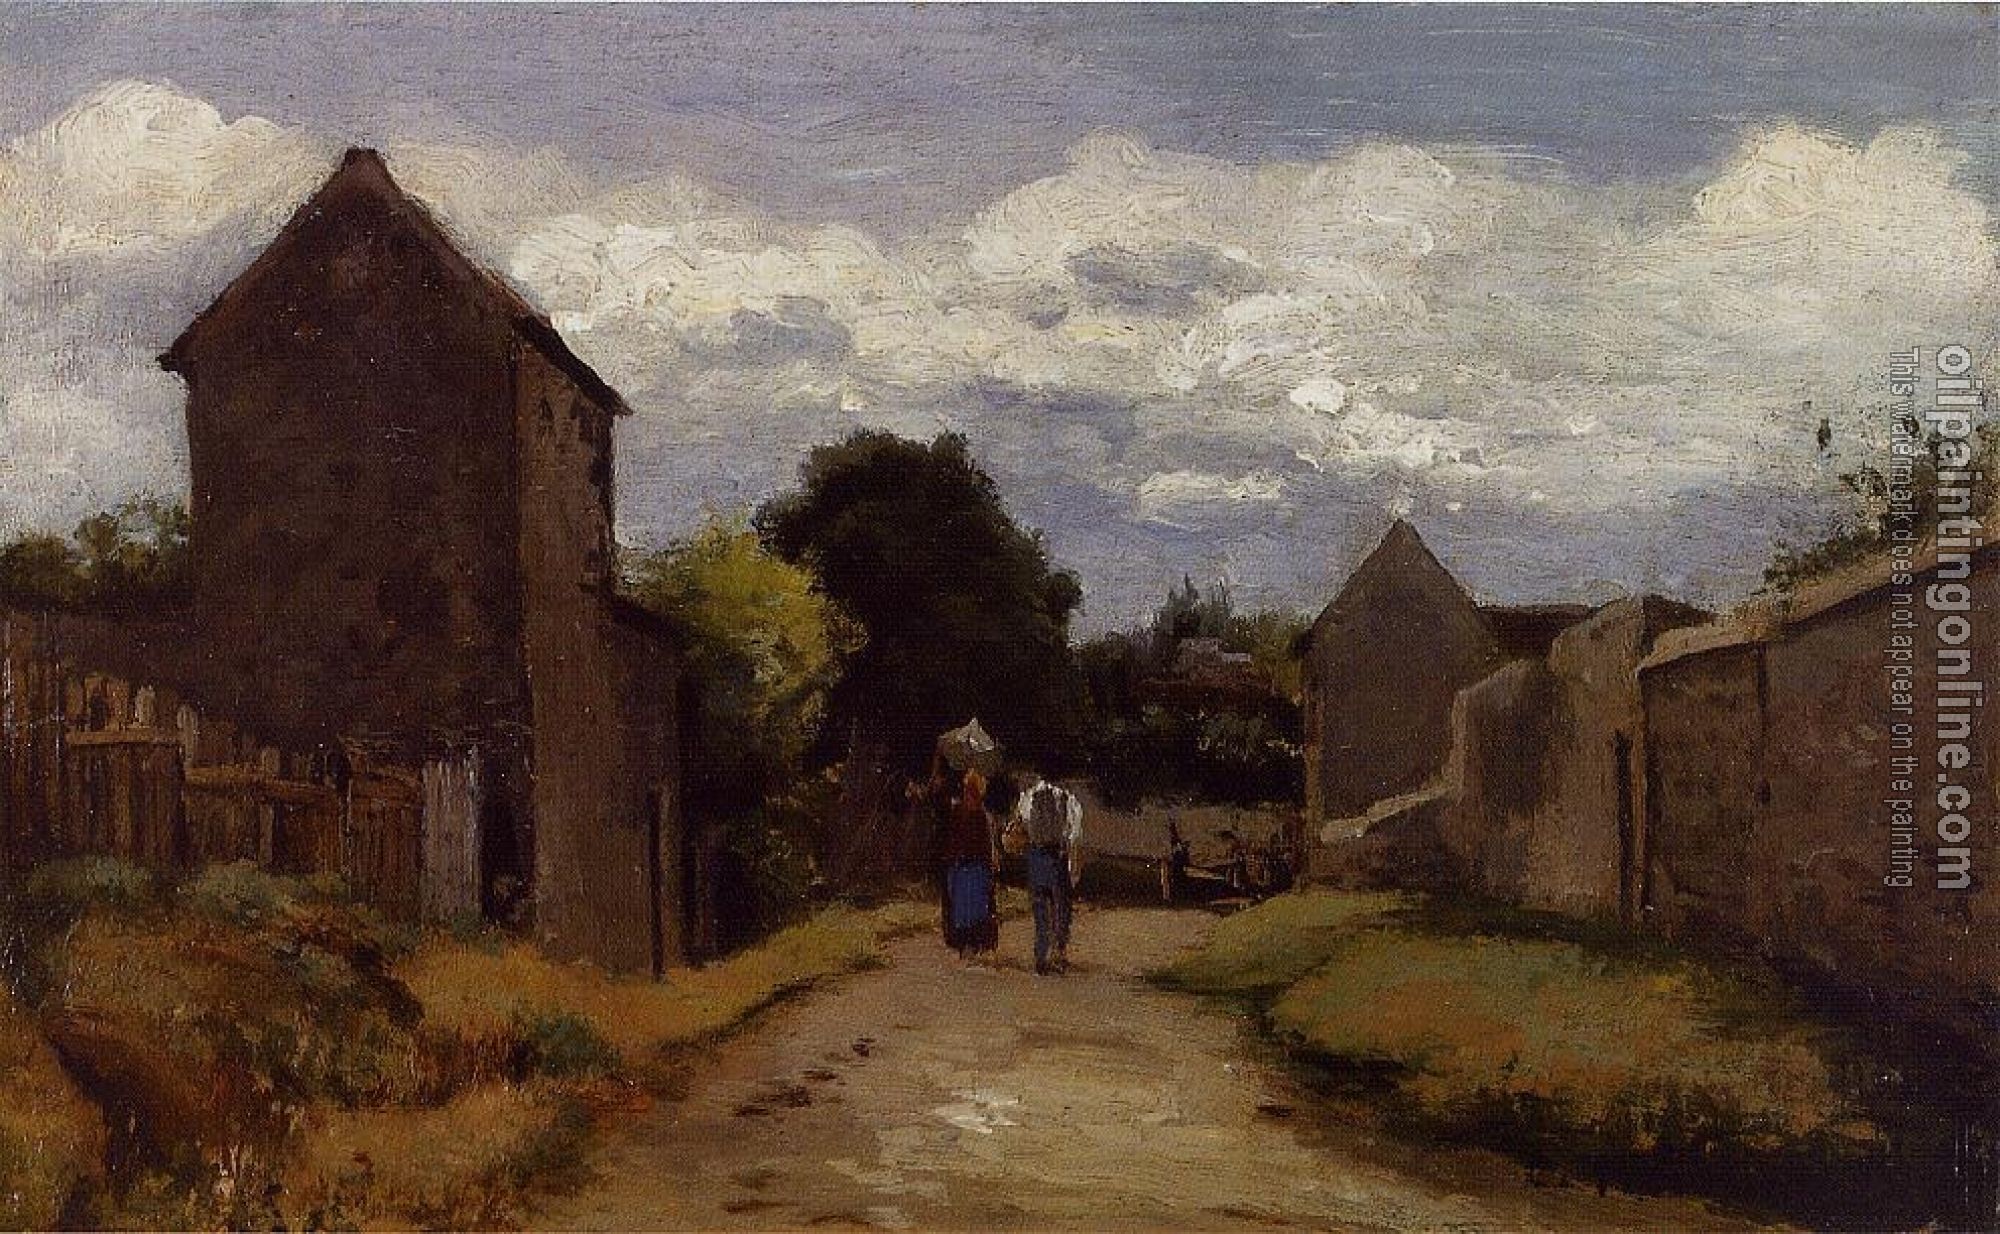 Pissarro, Camille - Male and Female Peasants on a Path Crossing the Countryside